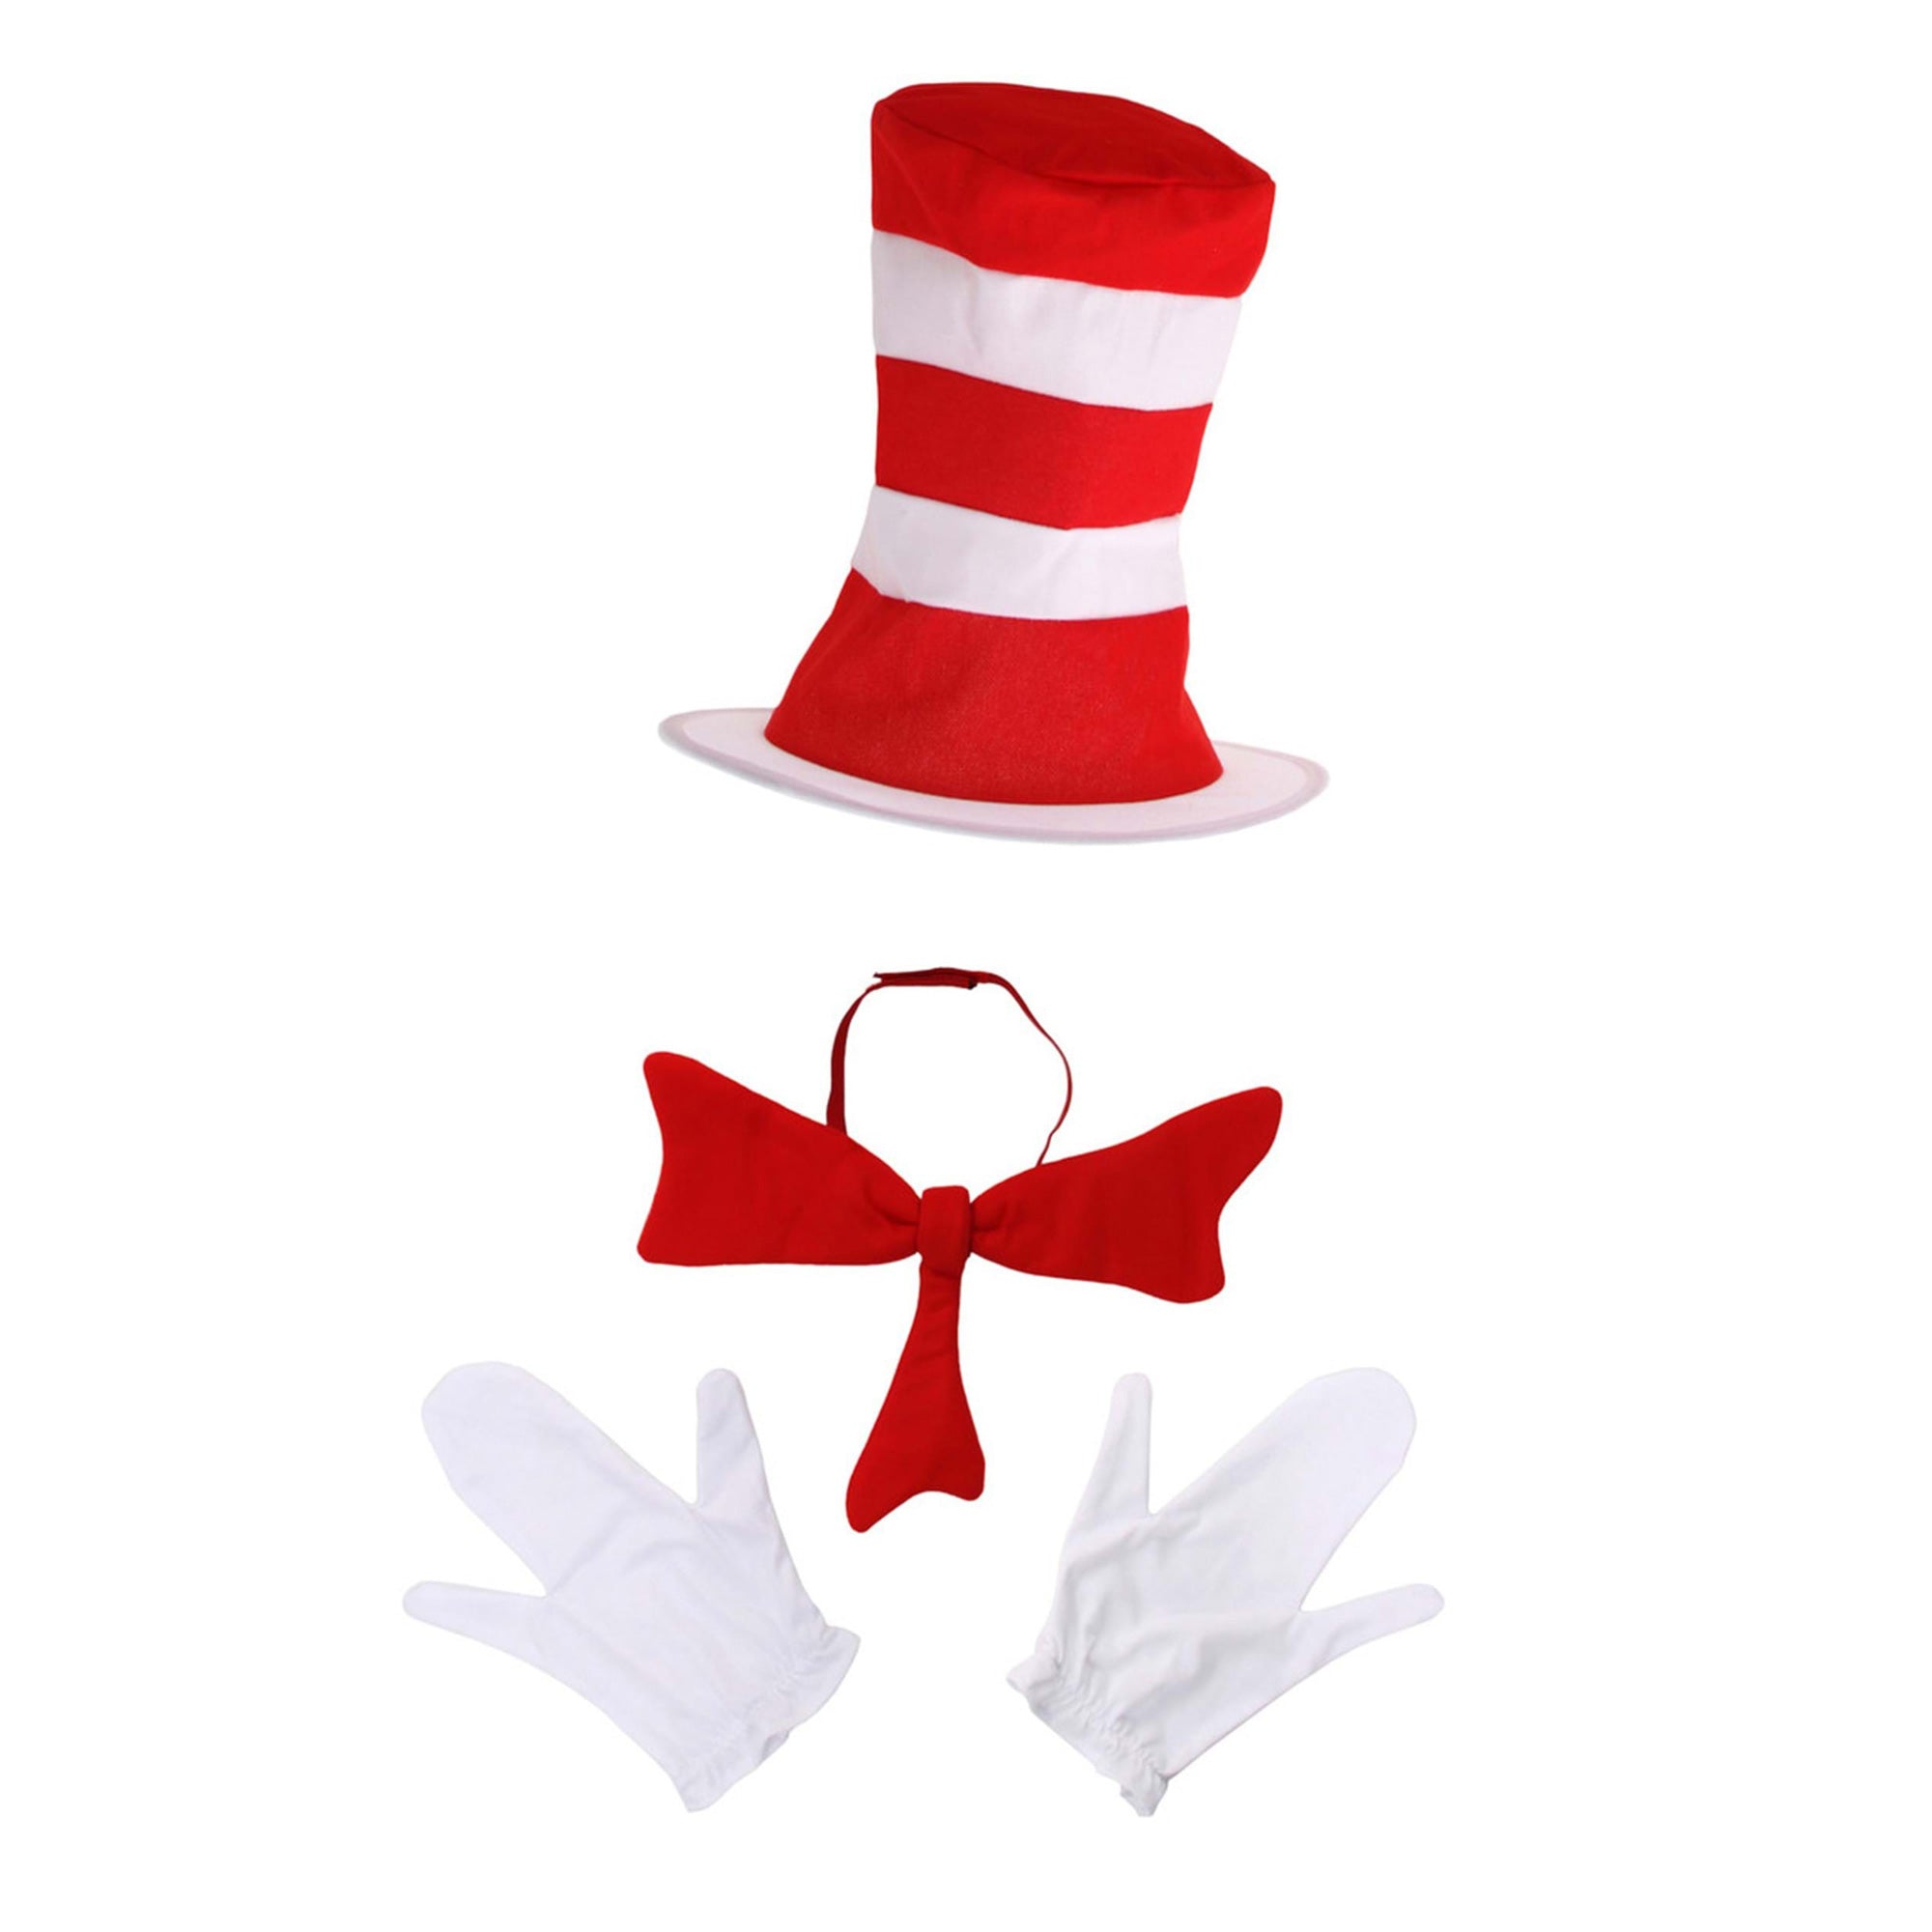 Child Dr. Seuss Cat in the Hat Accessory Kit